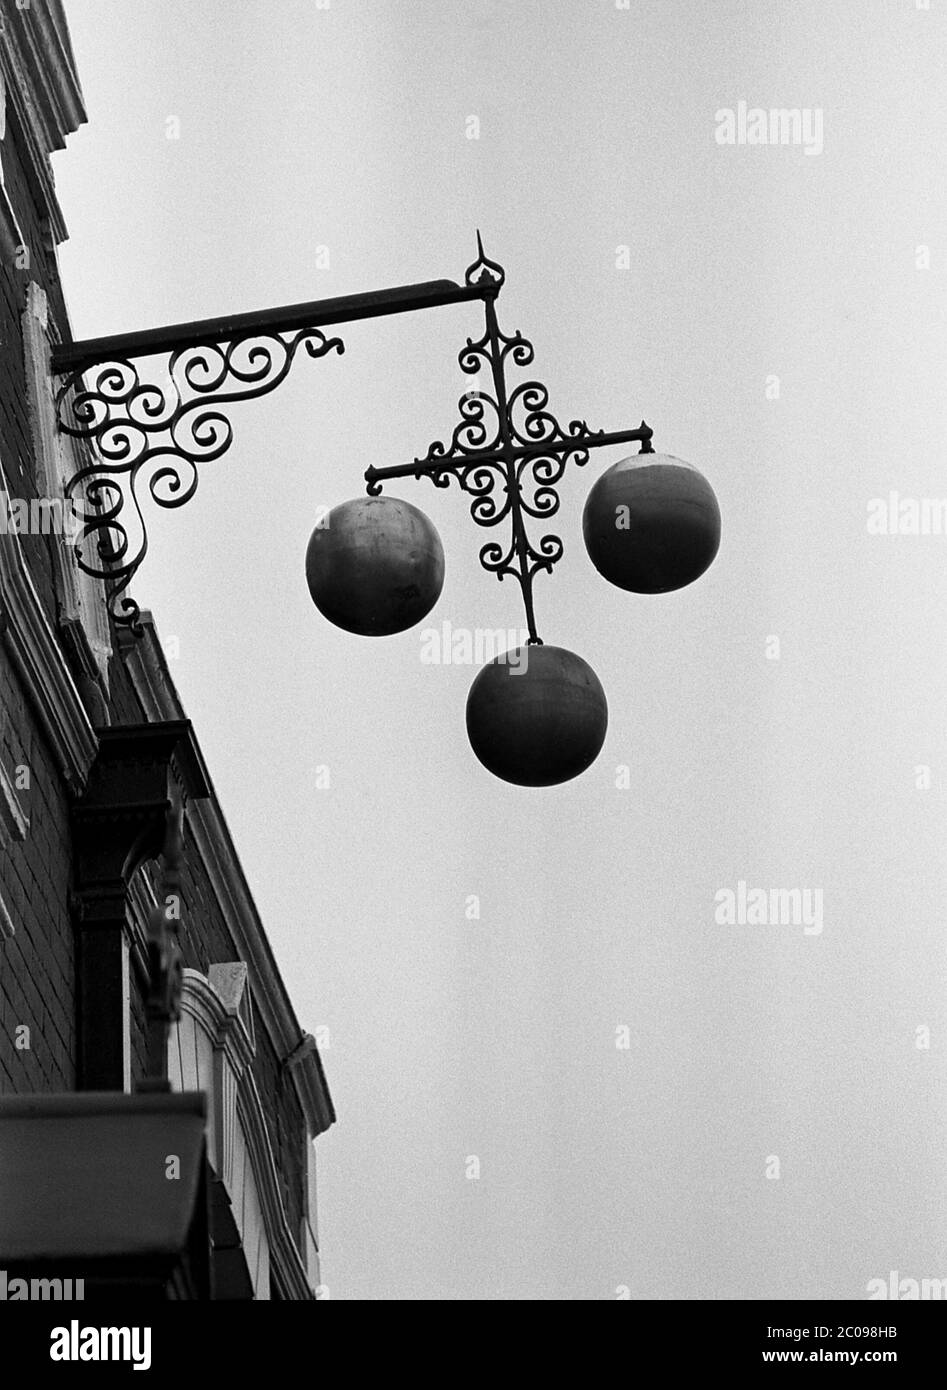 AJAXNETPHOTO. 14TH SEPTEMBER, 1969. PORTSMOUTH, ENGLAND. - SIGN OF THE TIMES - TRADITIONAL THREE BALLS PAWNBROKER SIGN HANGING OUTSIDE SHOP IN ARUNDEL STREET. PHOTO:JONATHAN EASTLAND/AJAX REF:356947 15 63 Stock Photo